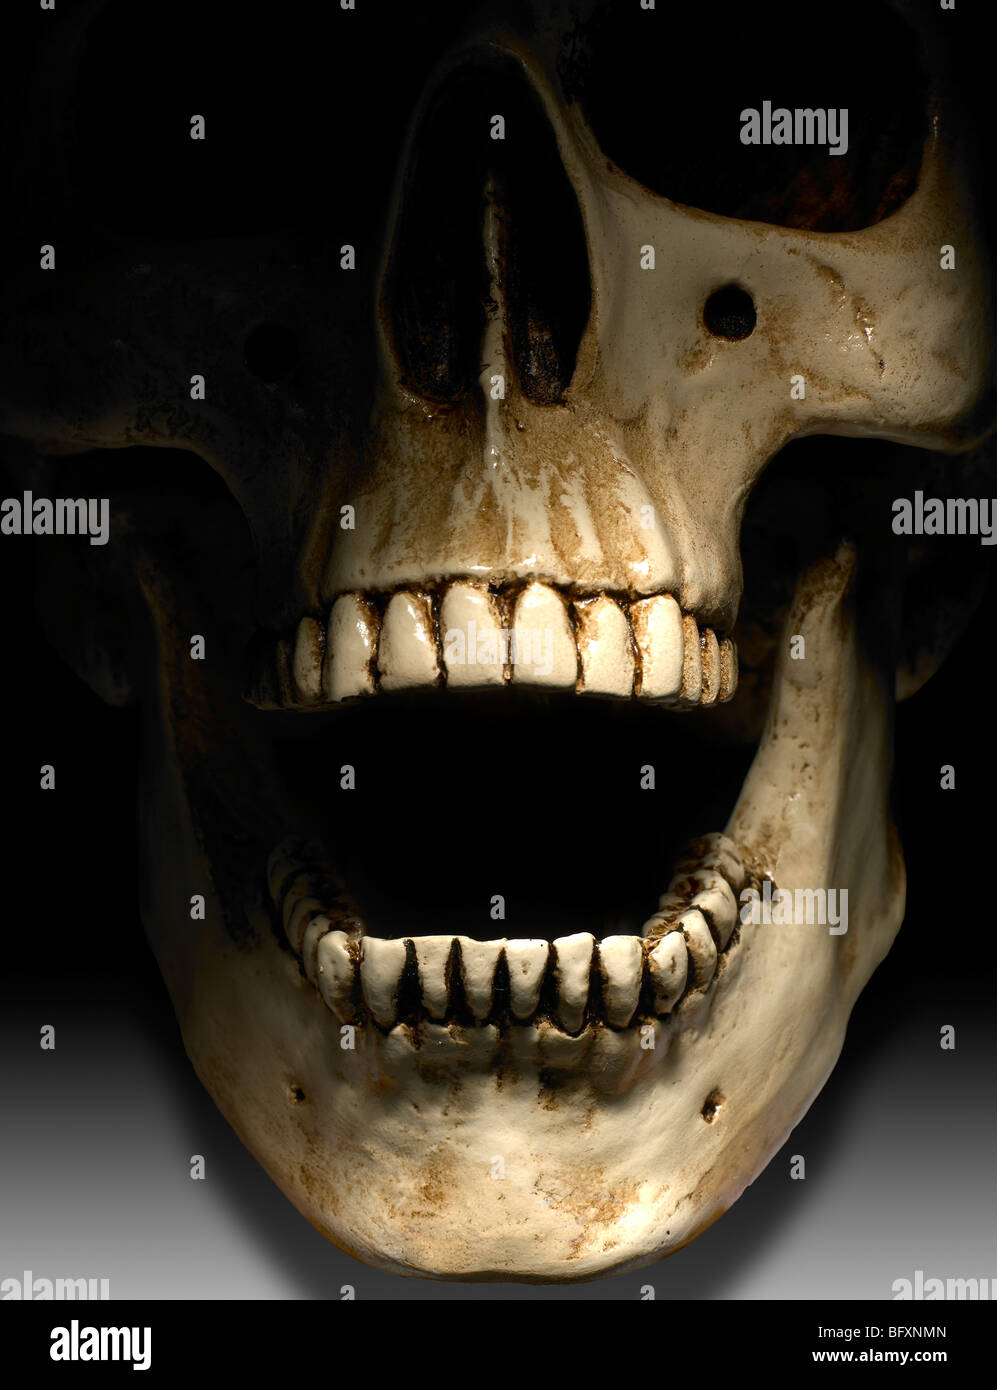 human skull side view mouth open